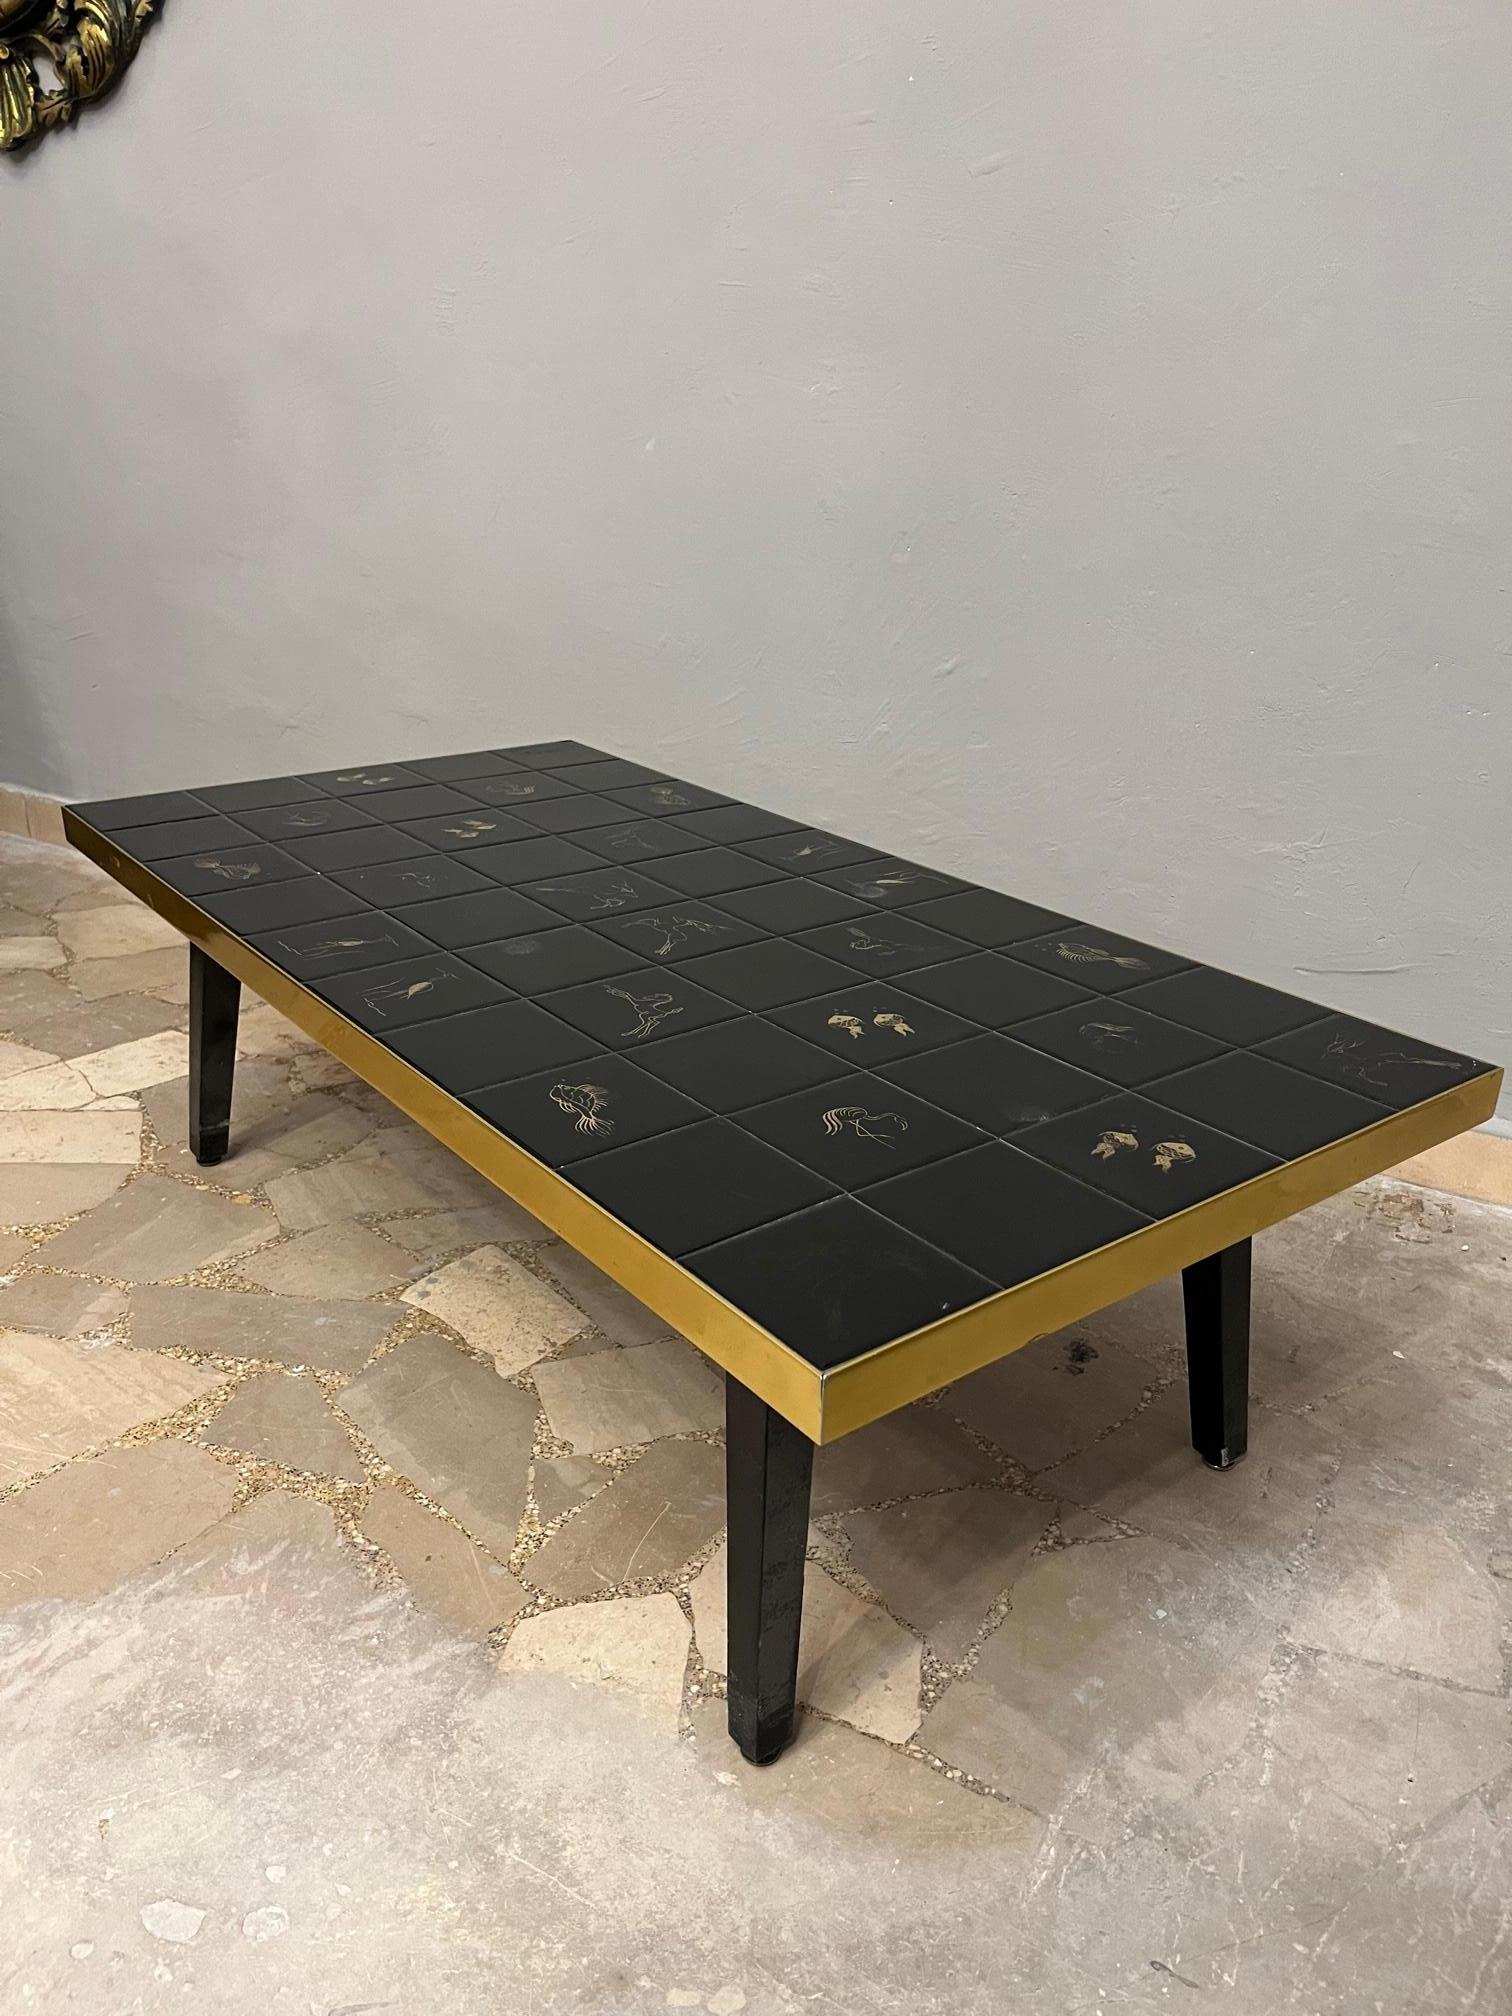 Low Coffee Table Living Room Wood and Black Majolica Decorated Gold Vintage 1970s -Design-

Anno: 1970 circa 

Materials: Wood, Brass, Black majolica tiles with Gold decoration

Condizioni: Molto Buone 

Measures: 

Cm 110 x cm 55 x cm 35h 